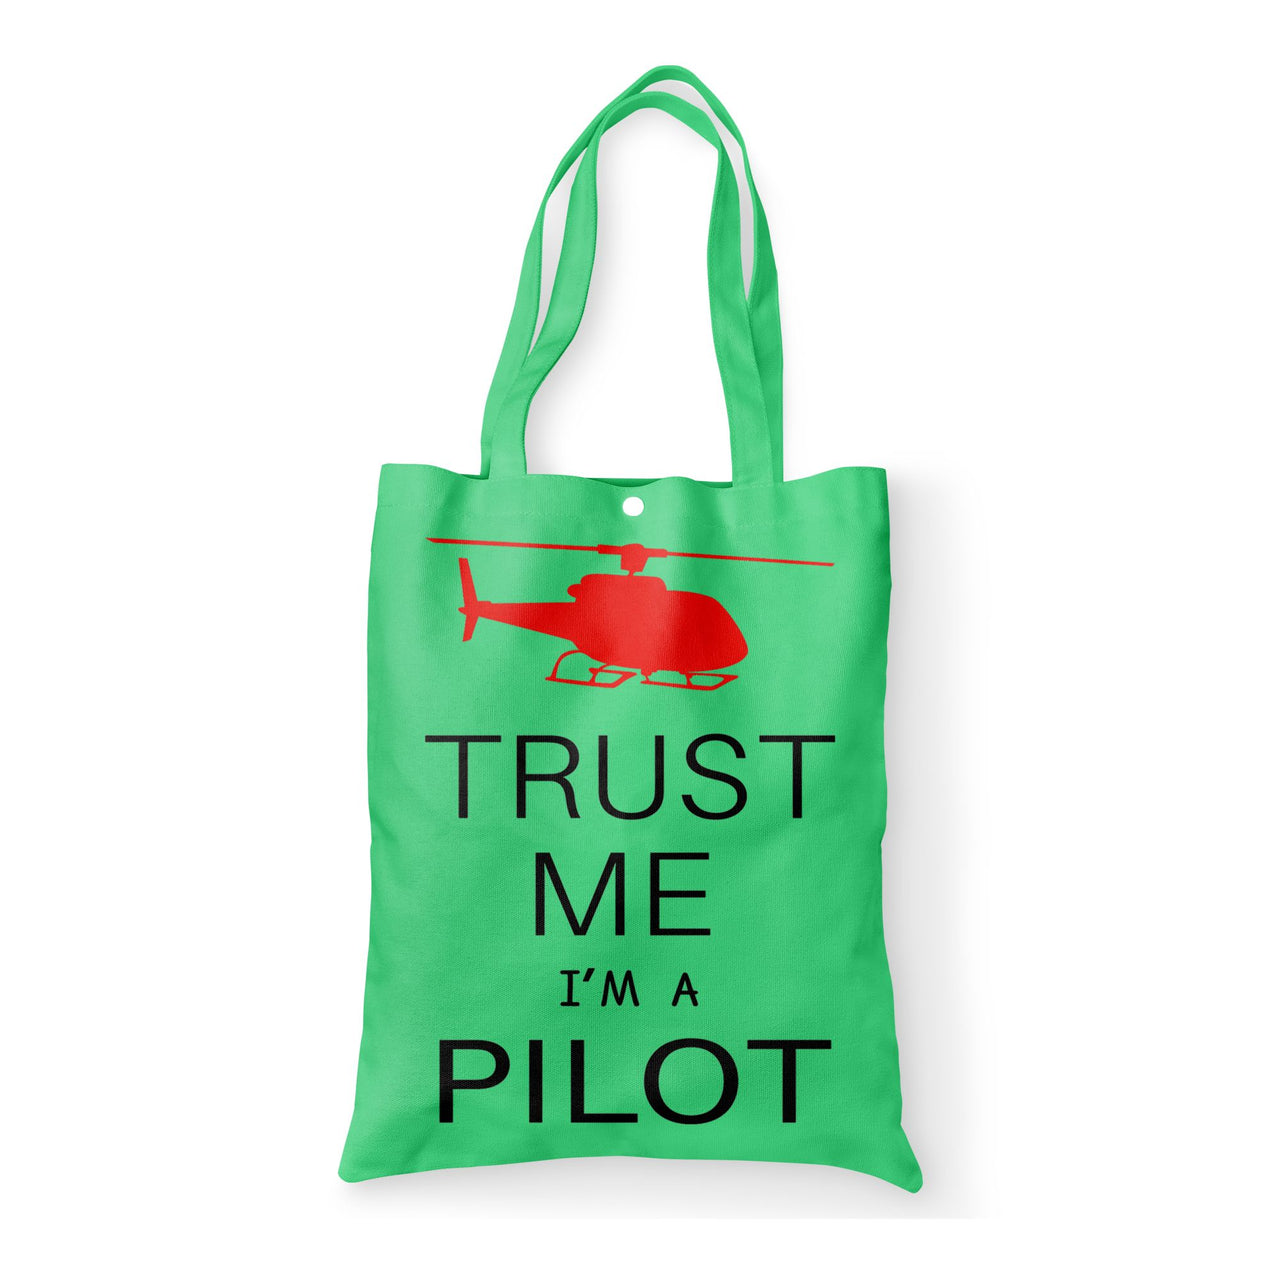 Trust Me I'm a Pilot (Helicopter) Designed Tote Bags